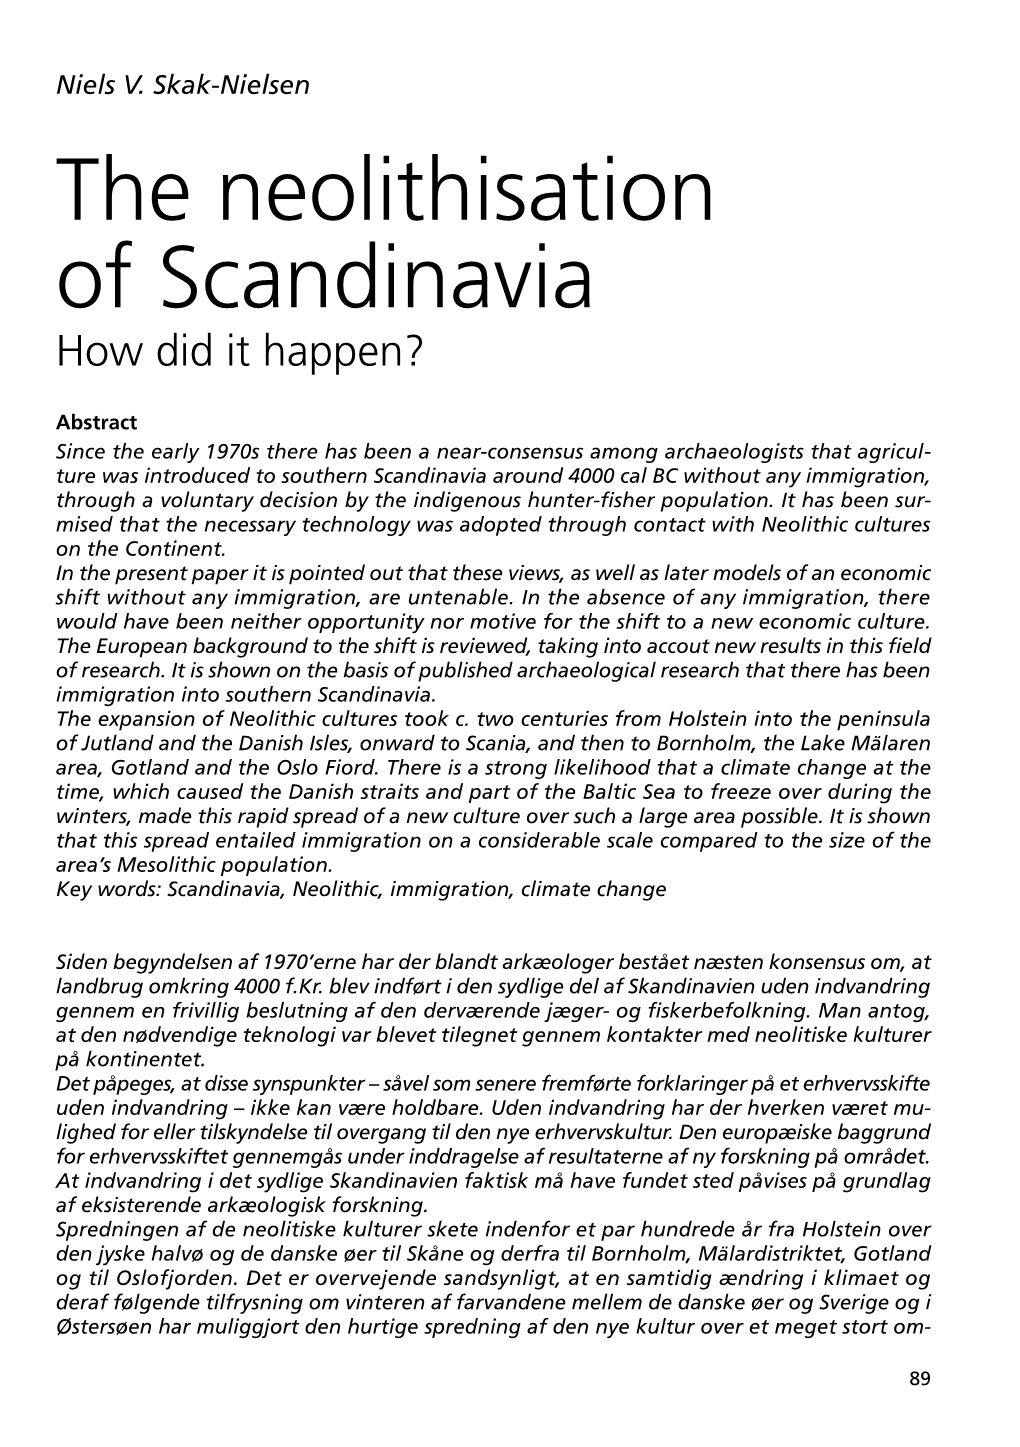 The Neolithisation of Scandinavia How Did It Happen?